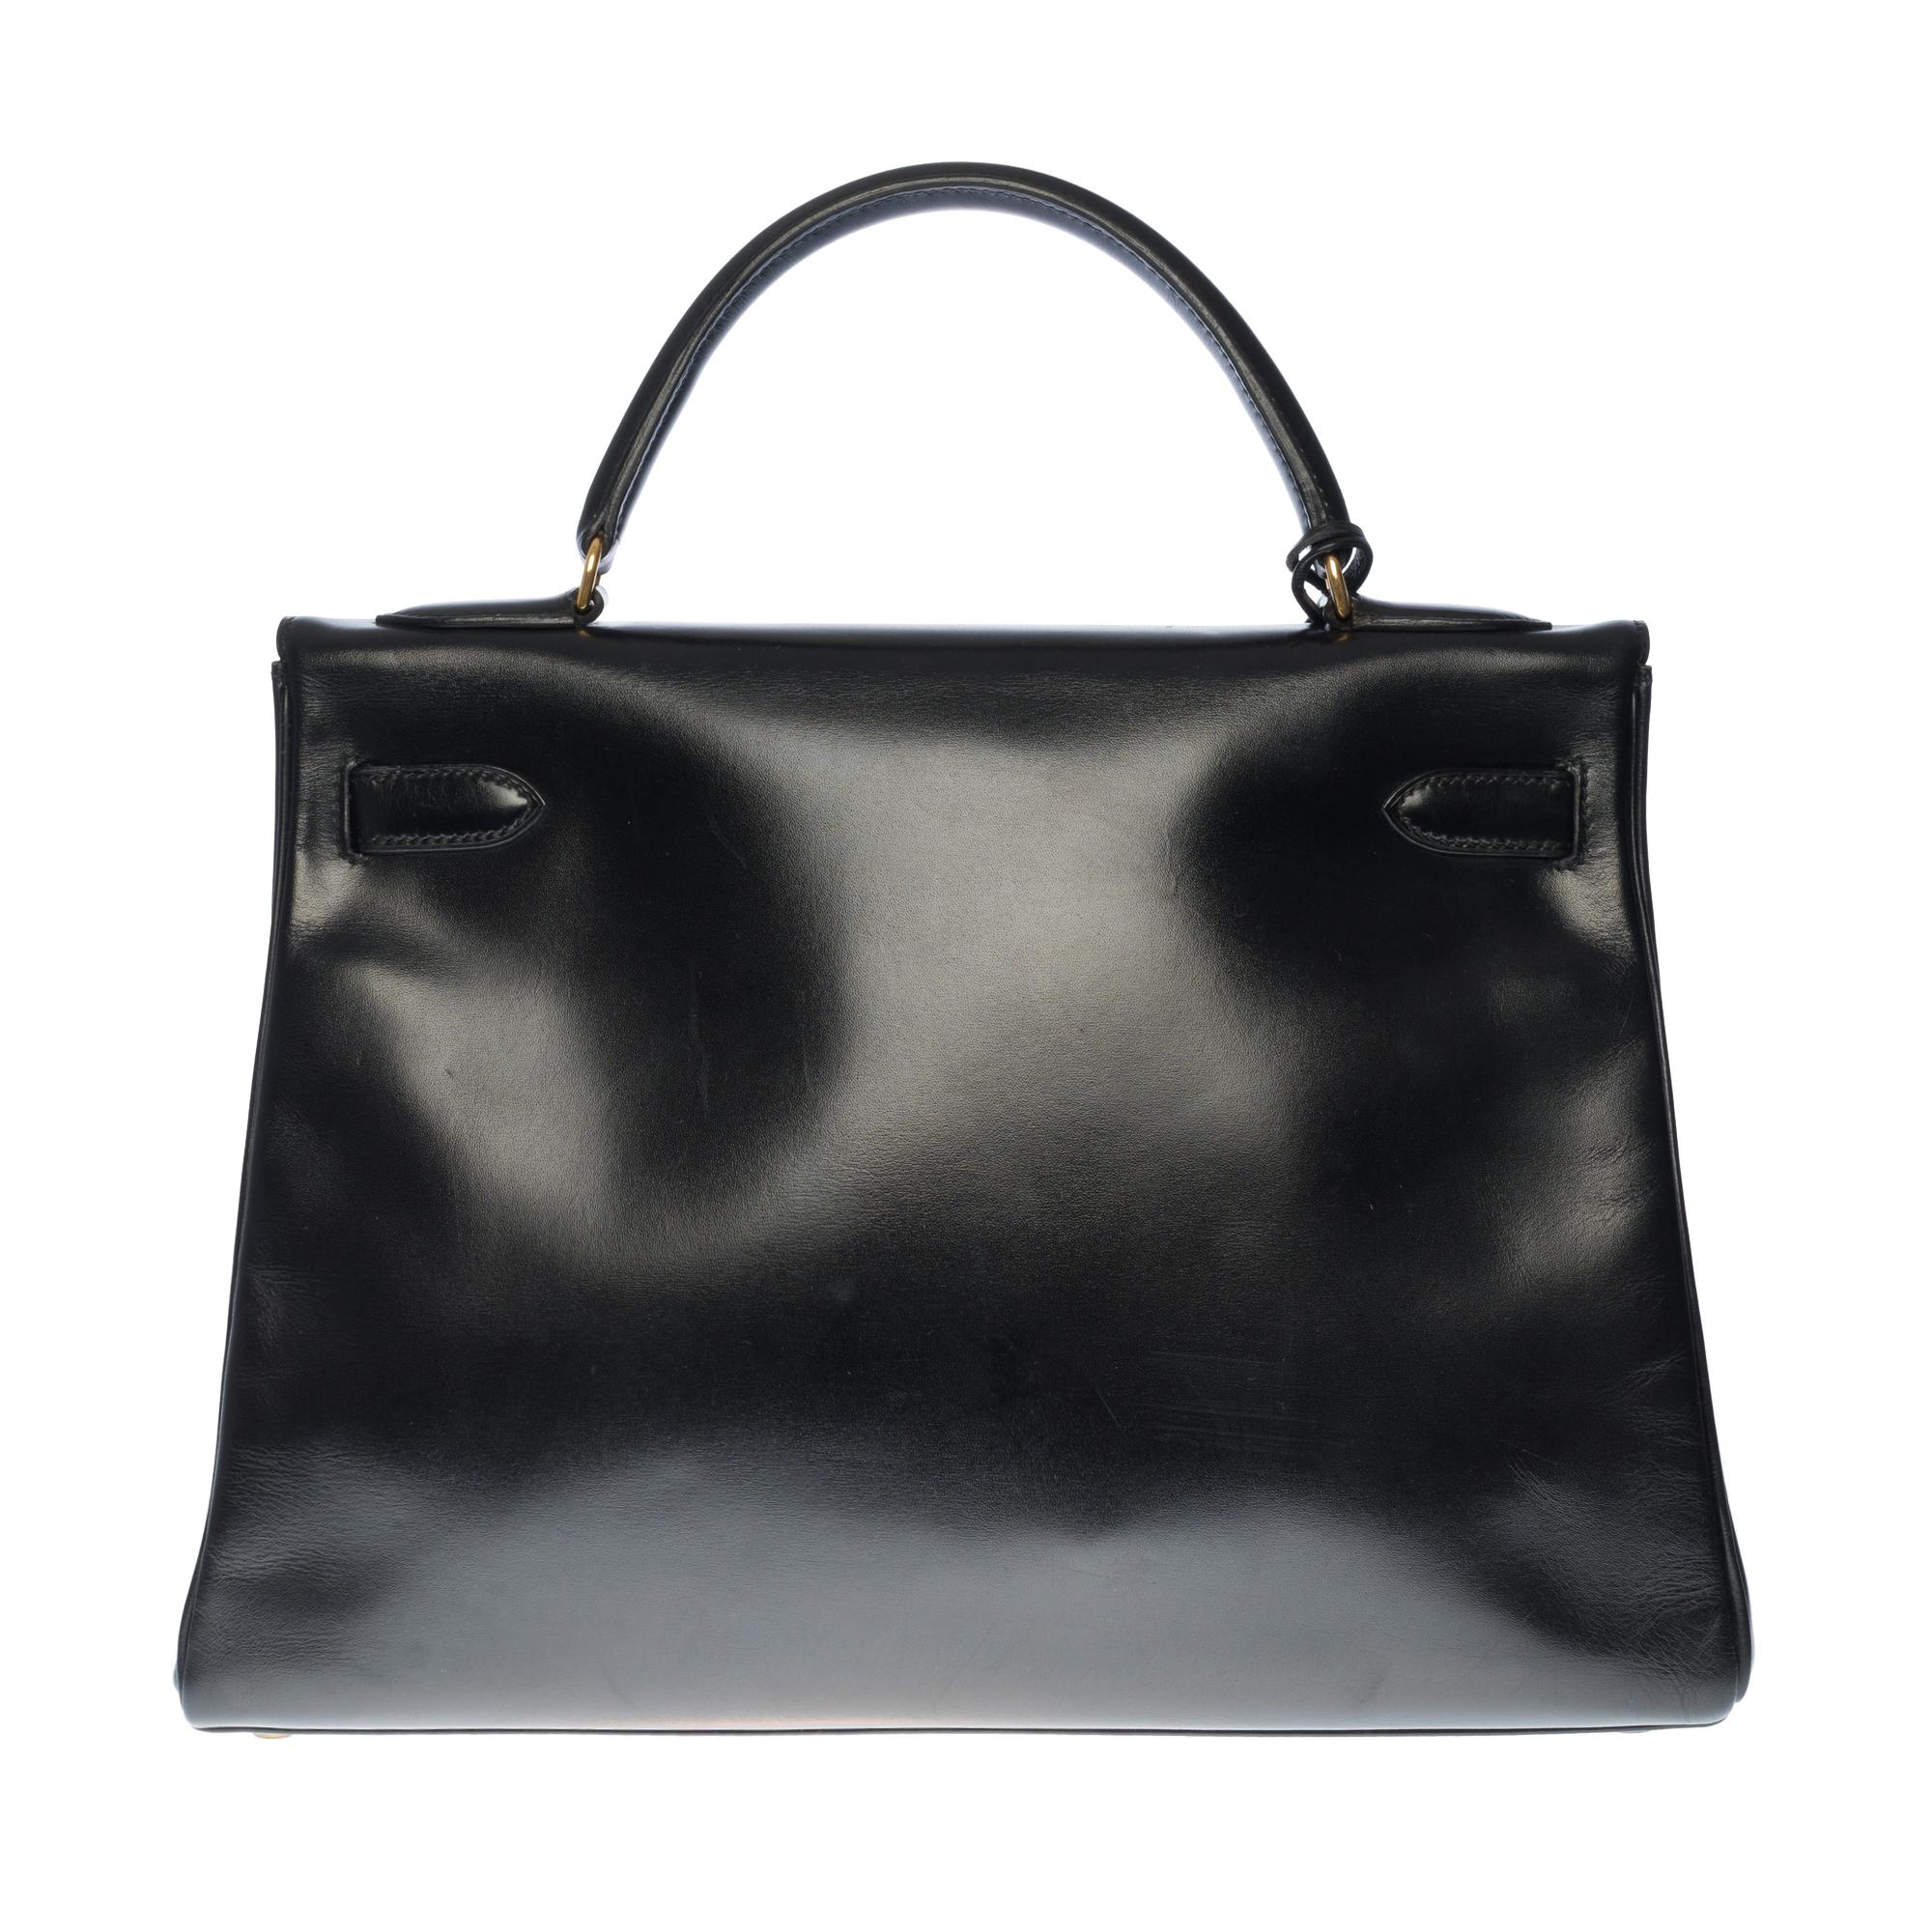 Gorgeous Hermes Kelly 32 retourné in black box calf leather Shoulder Bag with strap, Gold Plated Metal hardware, black leather handle, Removable black leather Shoulder Strap for Hand or Shoulder Support.

Closure by flap.
Lining in black leather,